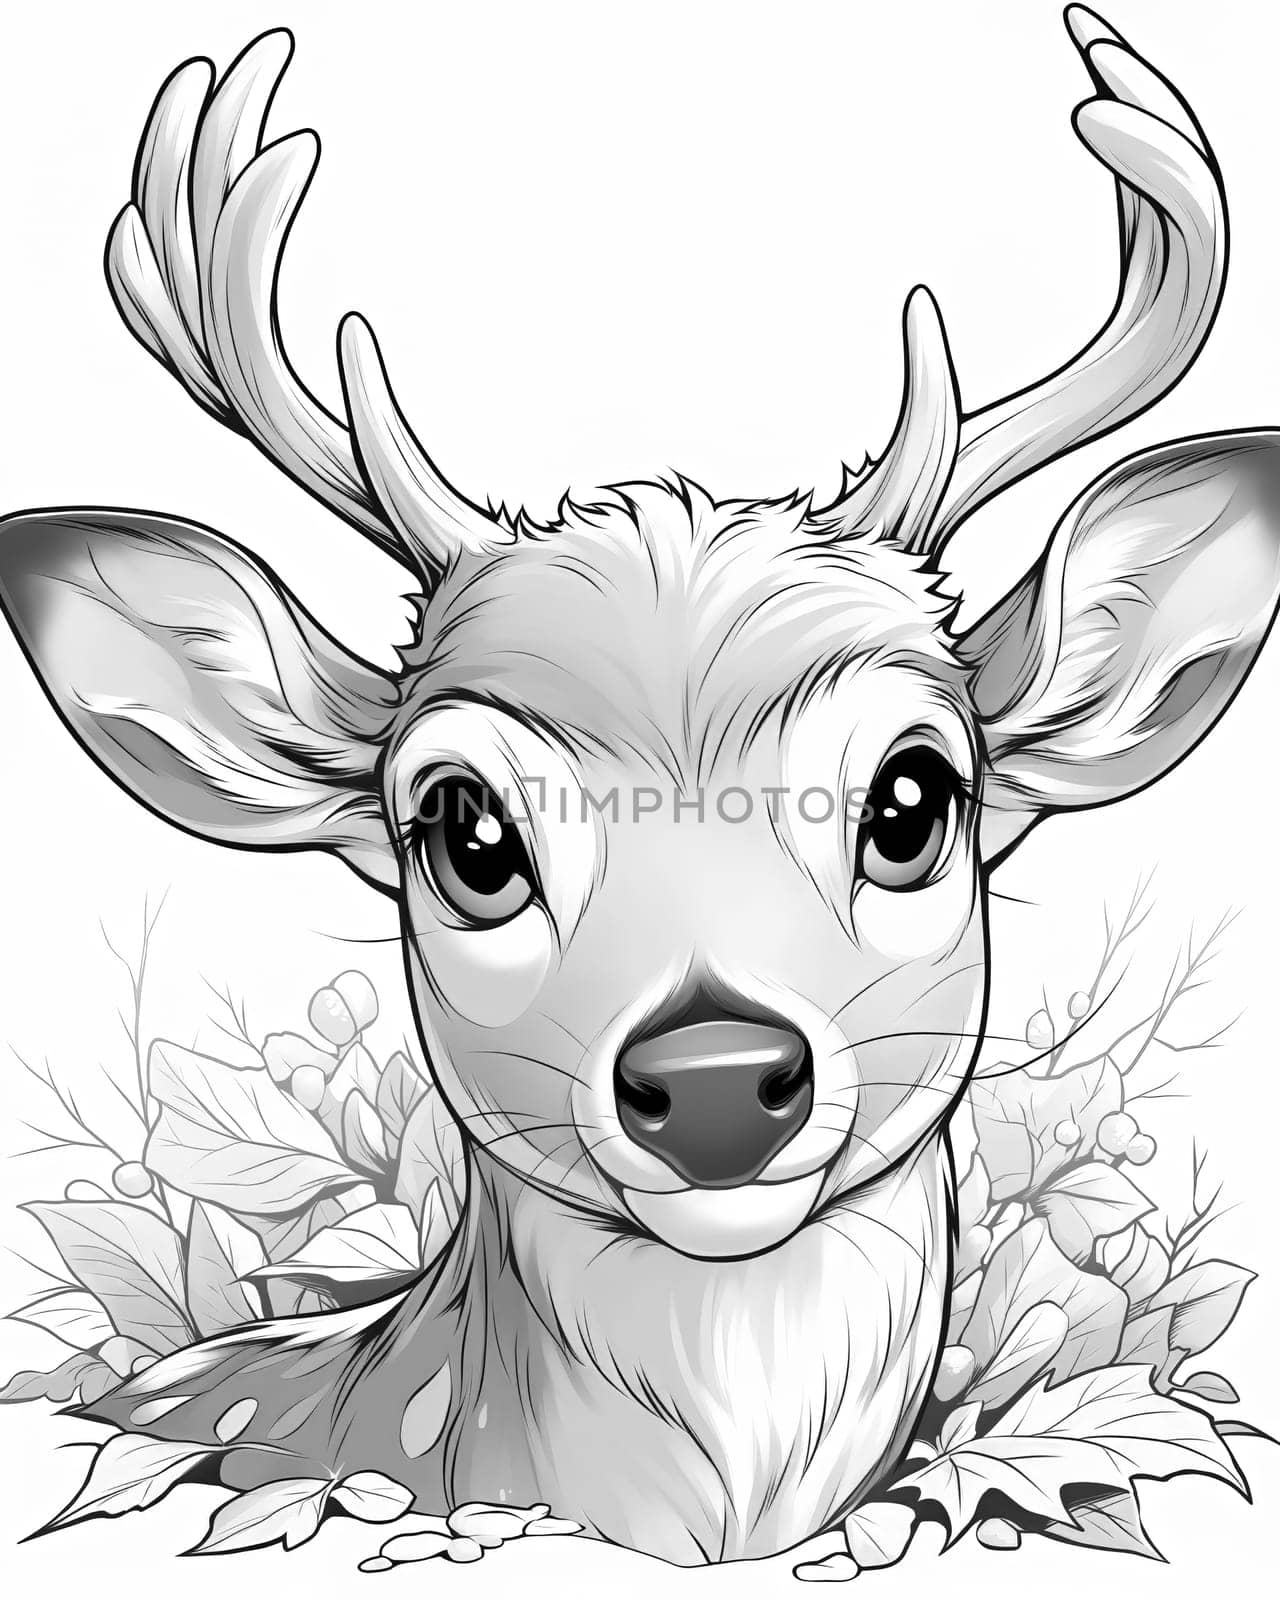 Coloring book for children, coloring animal, deer. by Fischeron